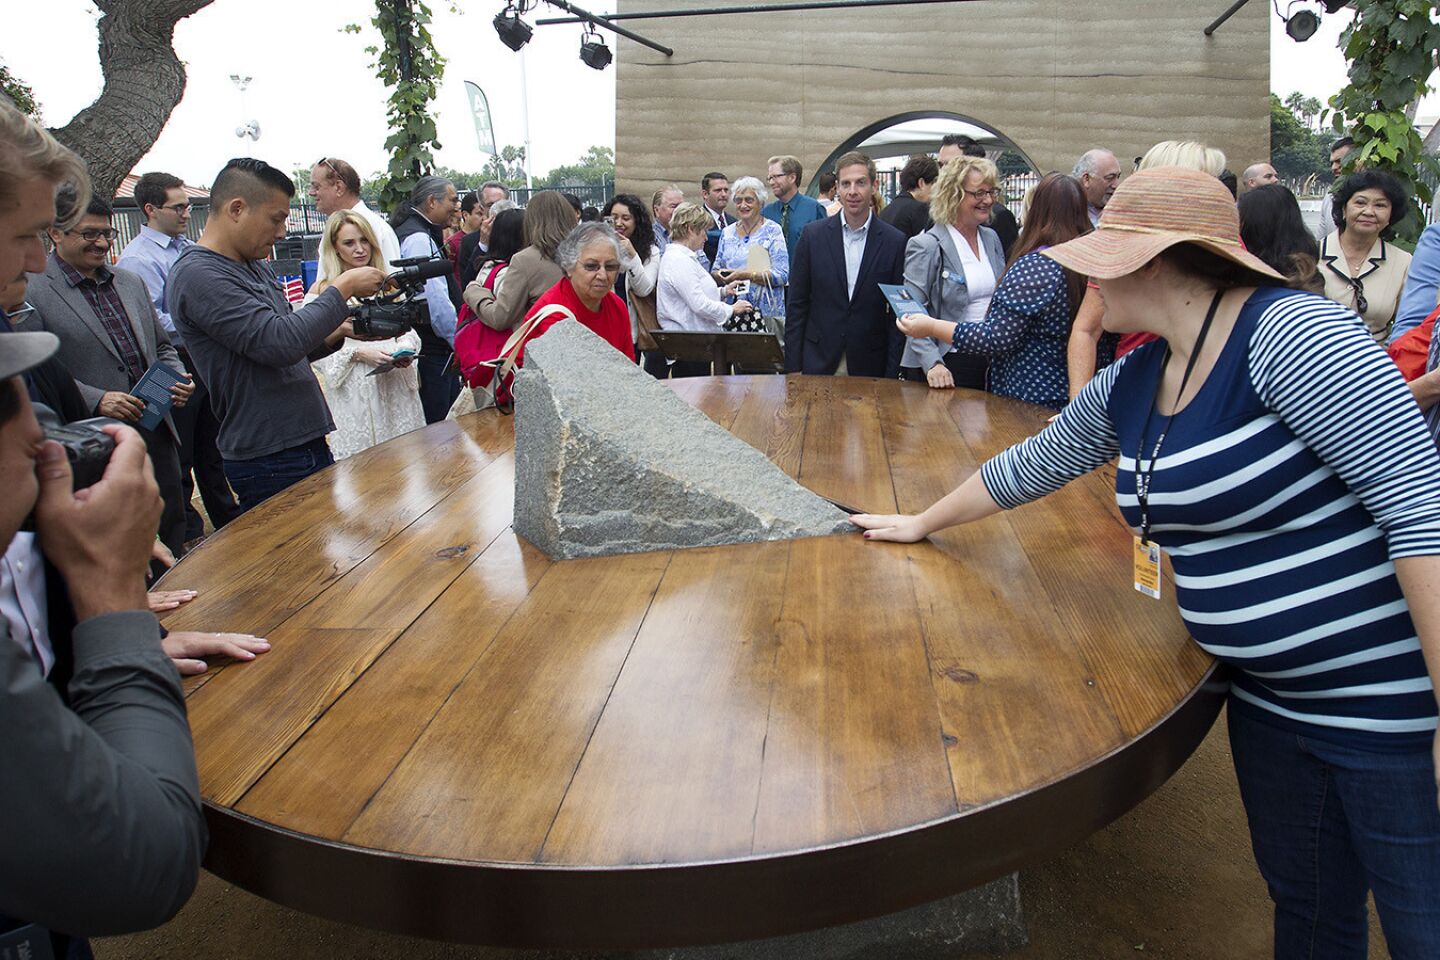 Table of Dignity memorial unveiled